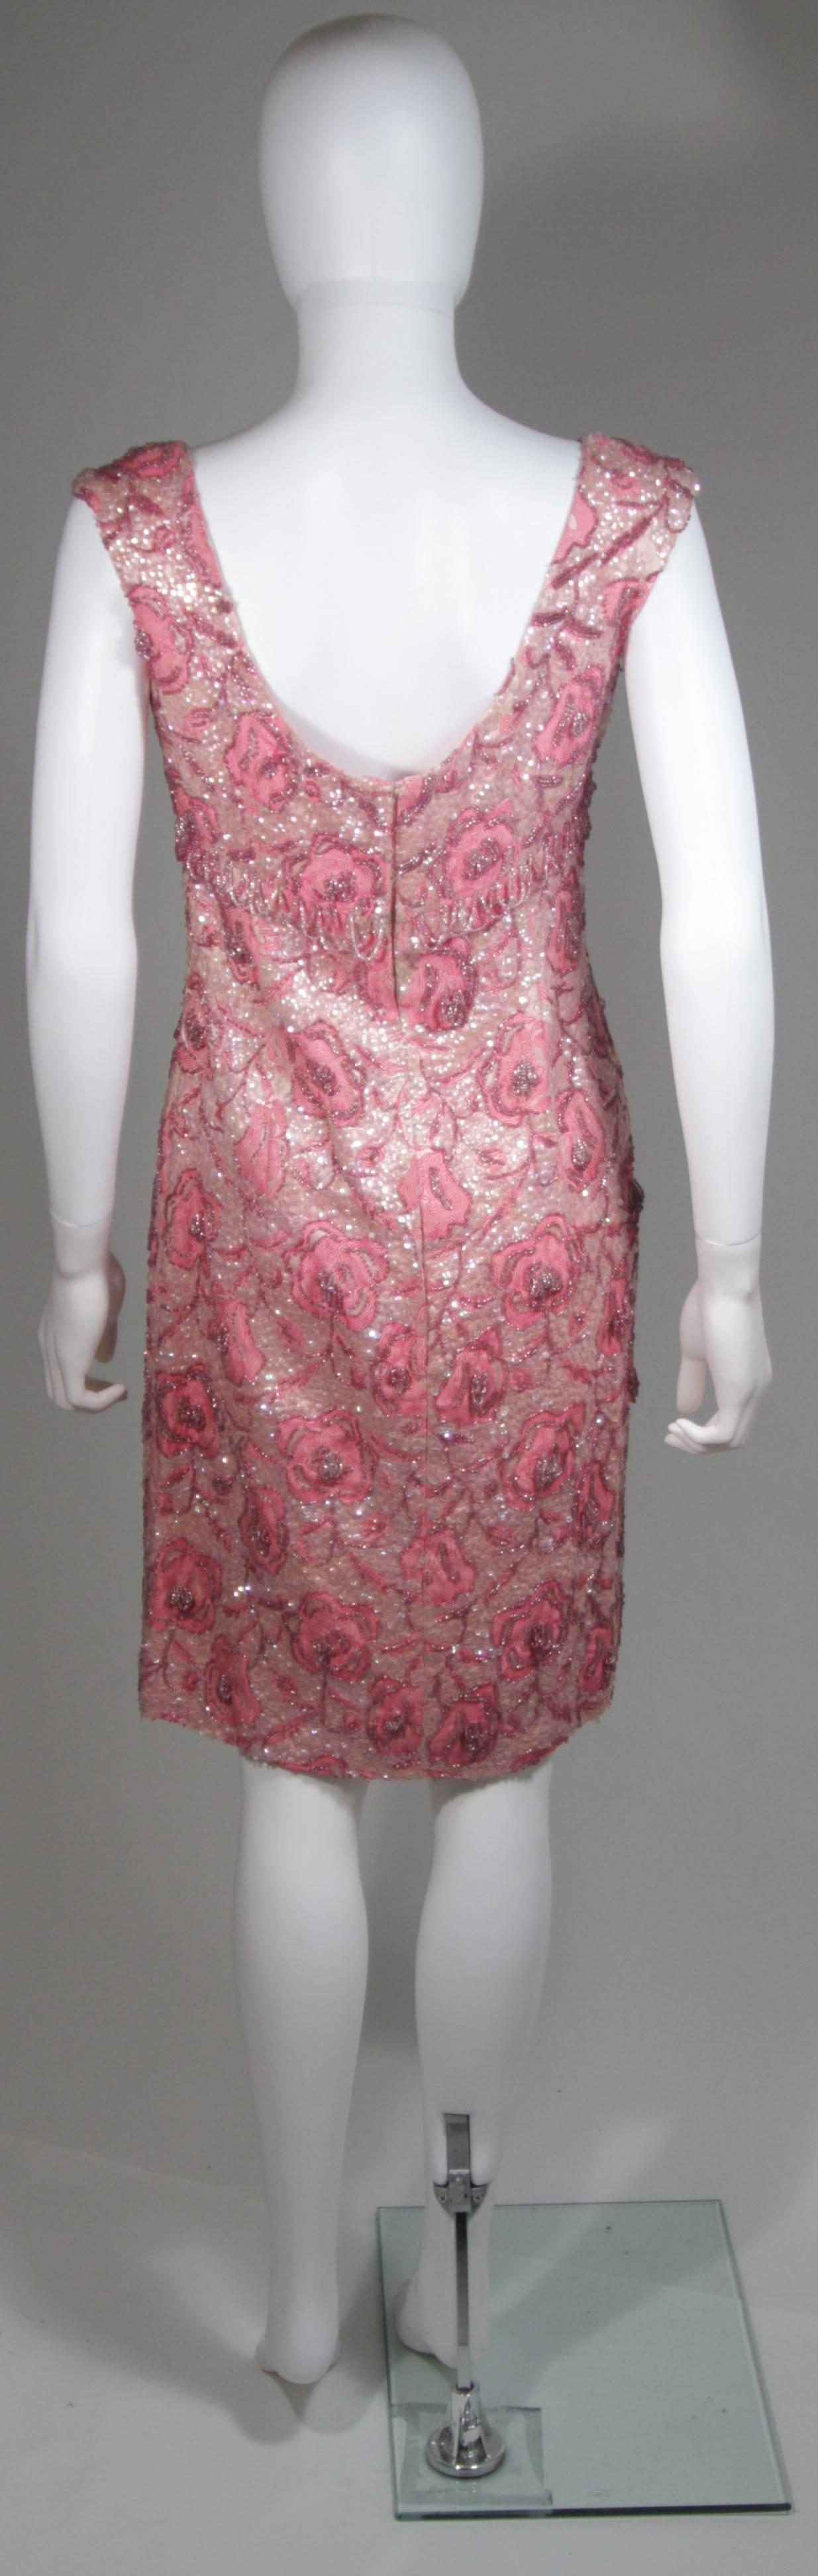 1960's SAKS 5TH AVE Pink Floral Brocade Hand Beaded Cocktail Dress Sz 4 For Sale 2